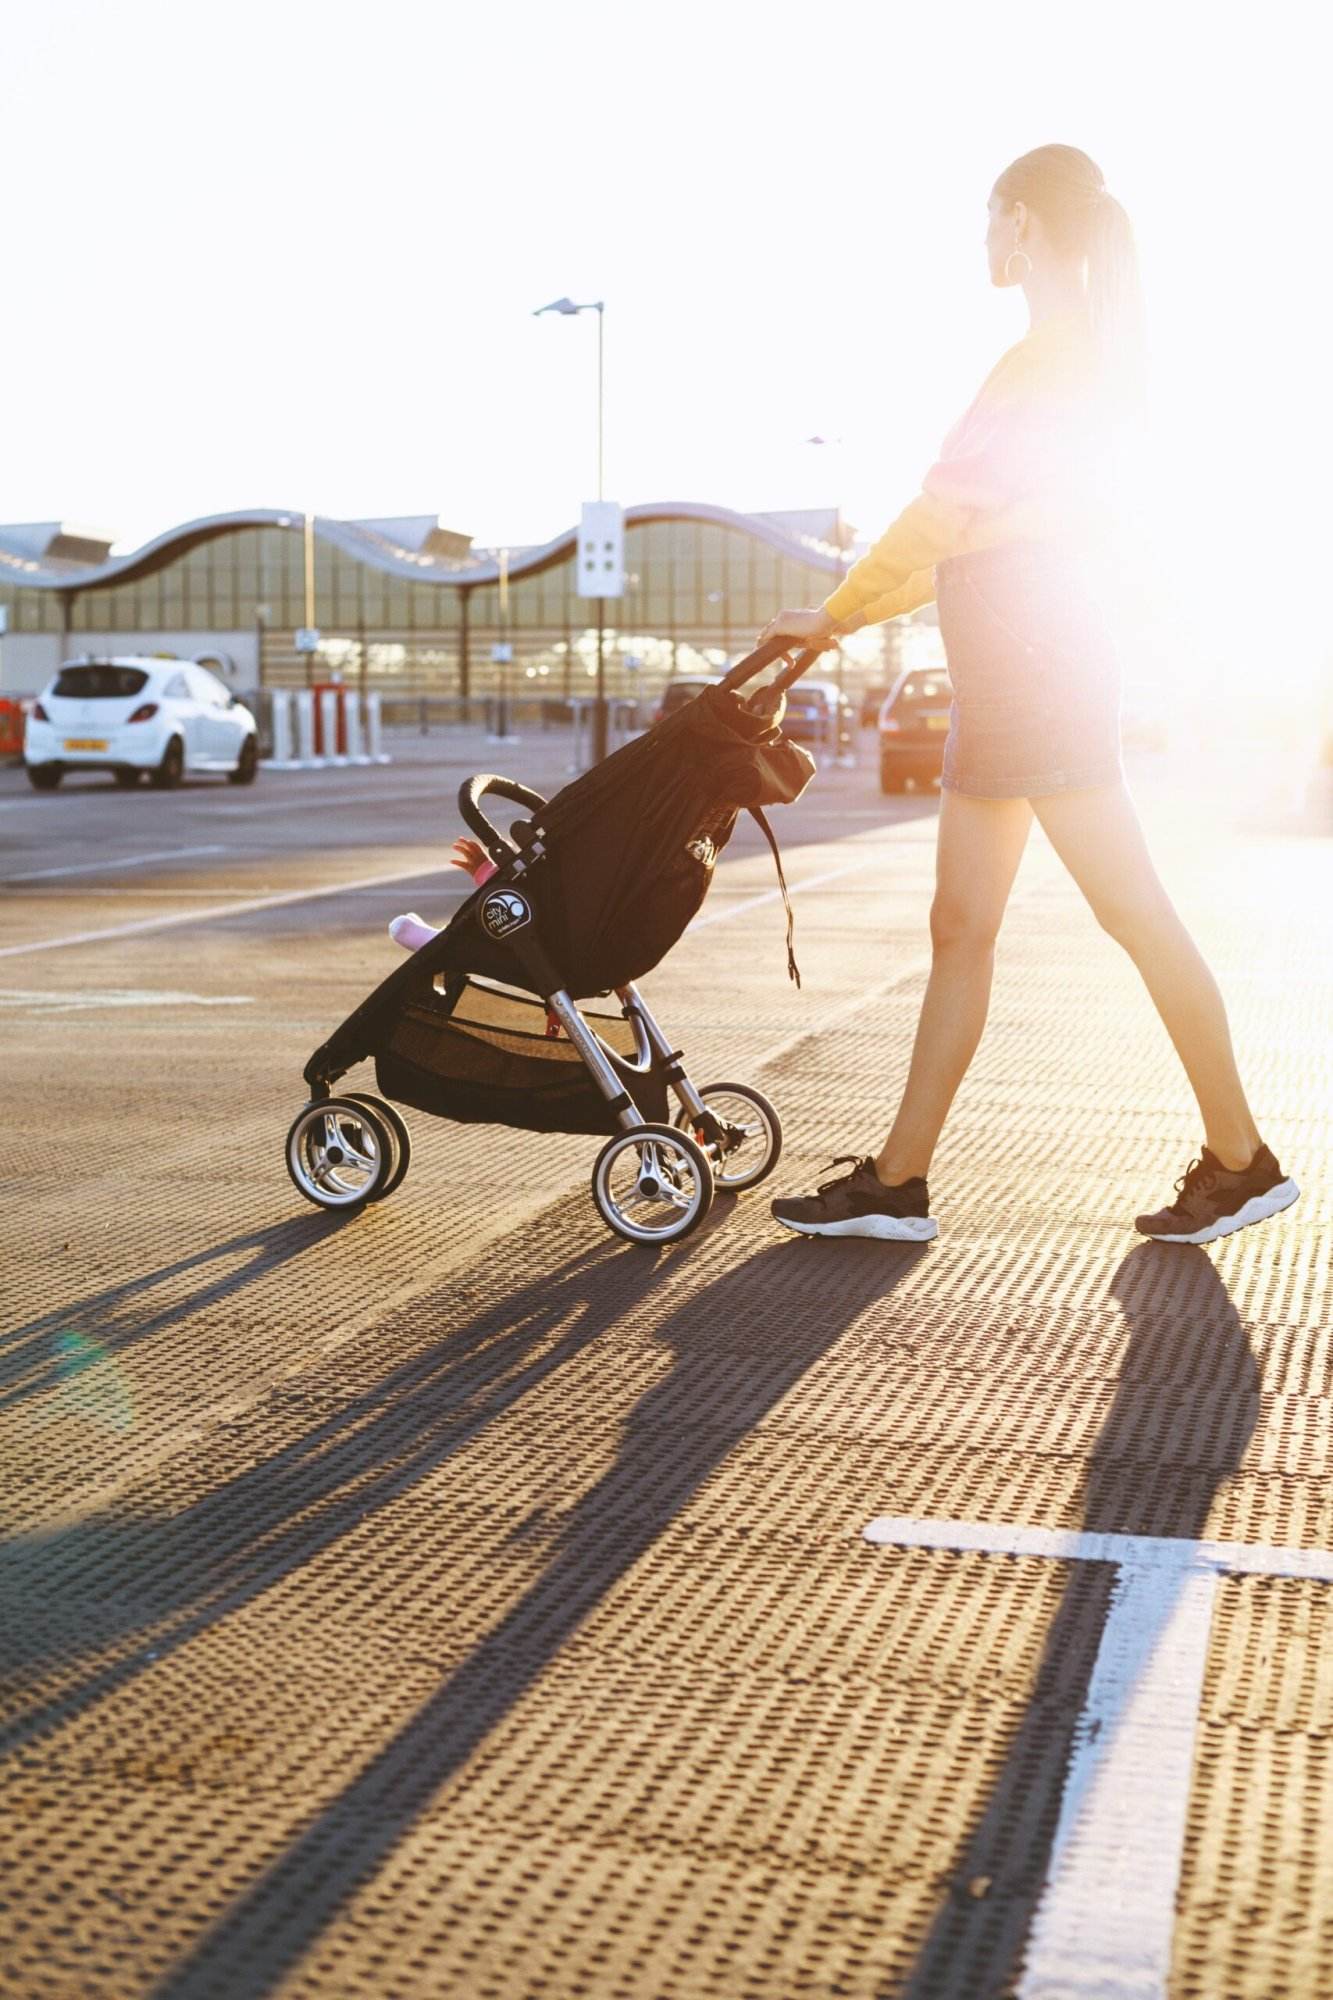 When Can Babies Go In A Stroller Without A Car Seat?